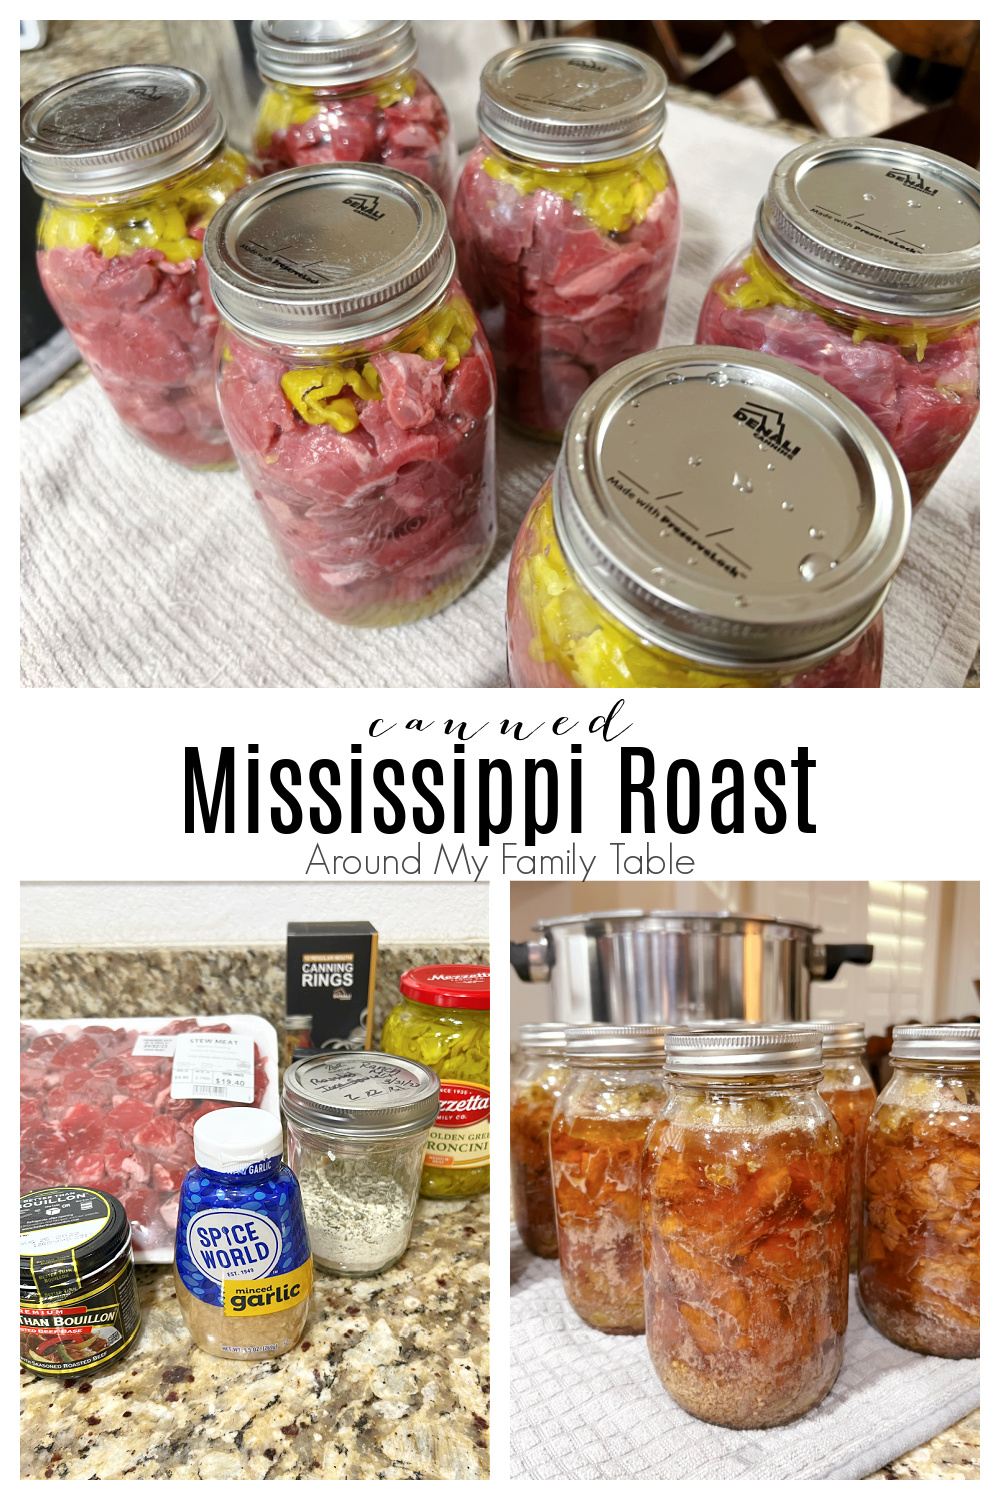 Mississippi Pot Roast is a beef roast cooked with pepperoncinis, ranch seasoning, and slow cooked in some sort of beef bouillon. My canned Mississippi Roast recipe is perfect for a quick and easy meal any night of the week. It's delicious and will quickly become a family favorite.  via @slingmama